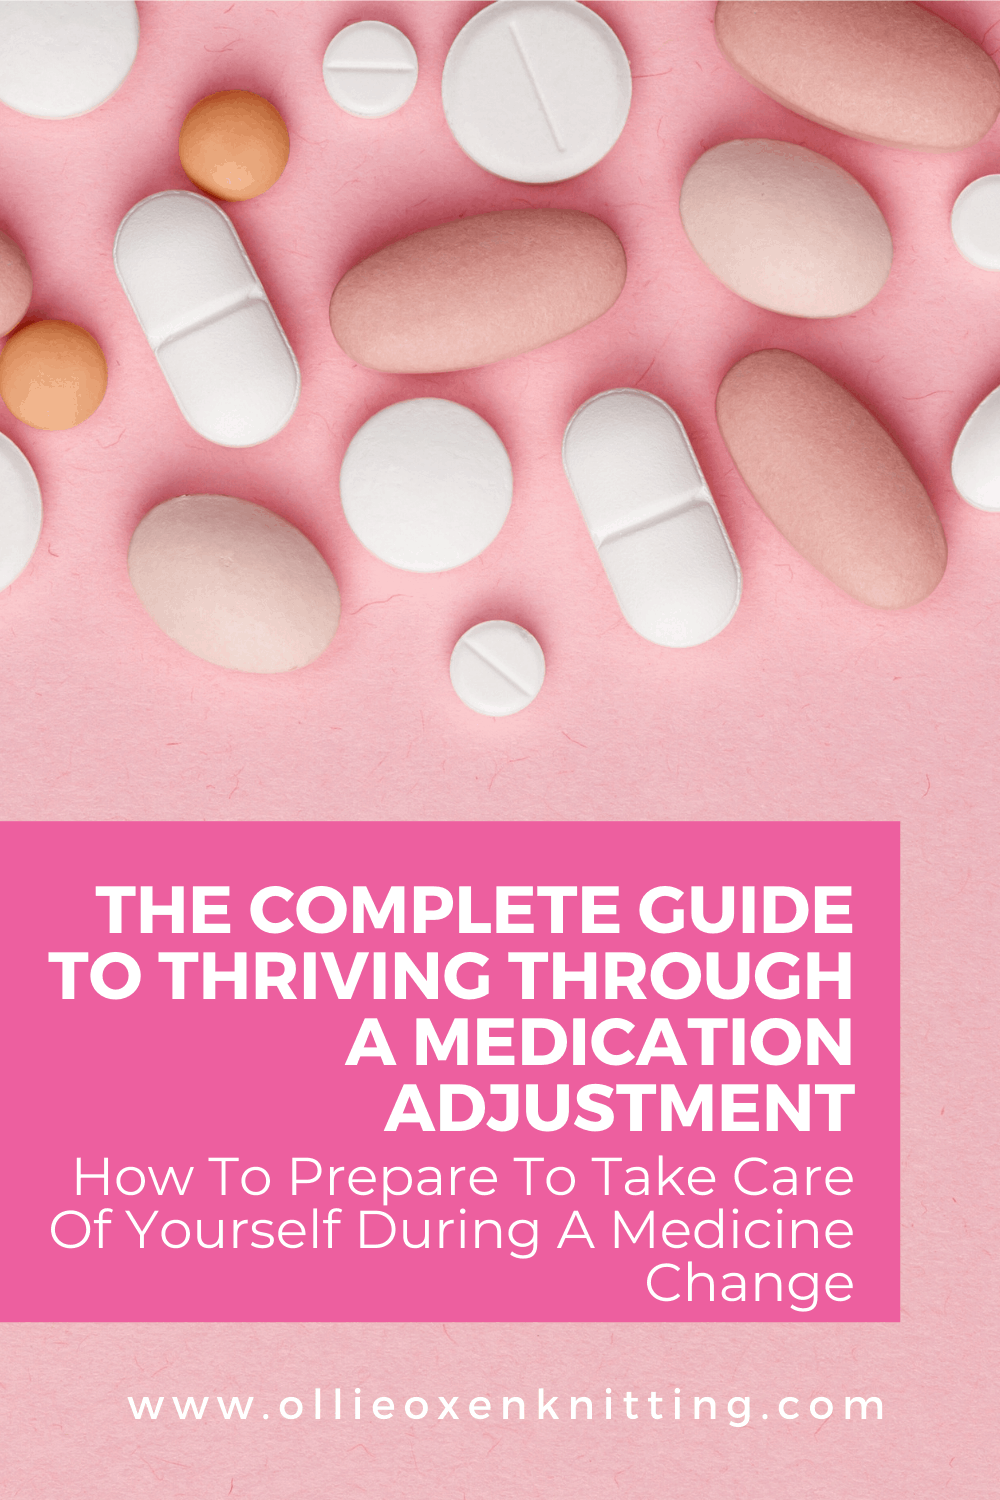 The Complete Guide To Thriving Through A Medication Adjustment: How To Prepare To Take Care Of Yourself During A Medicine Change | Ollie Oxen Knitting